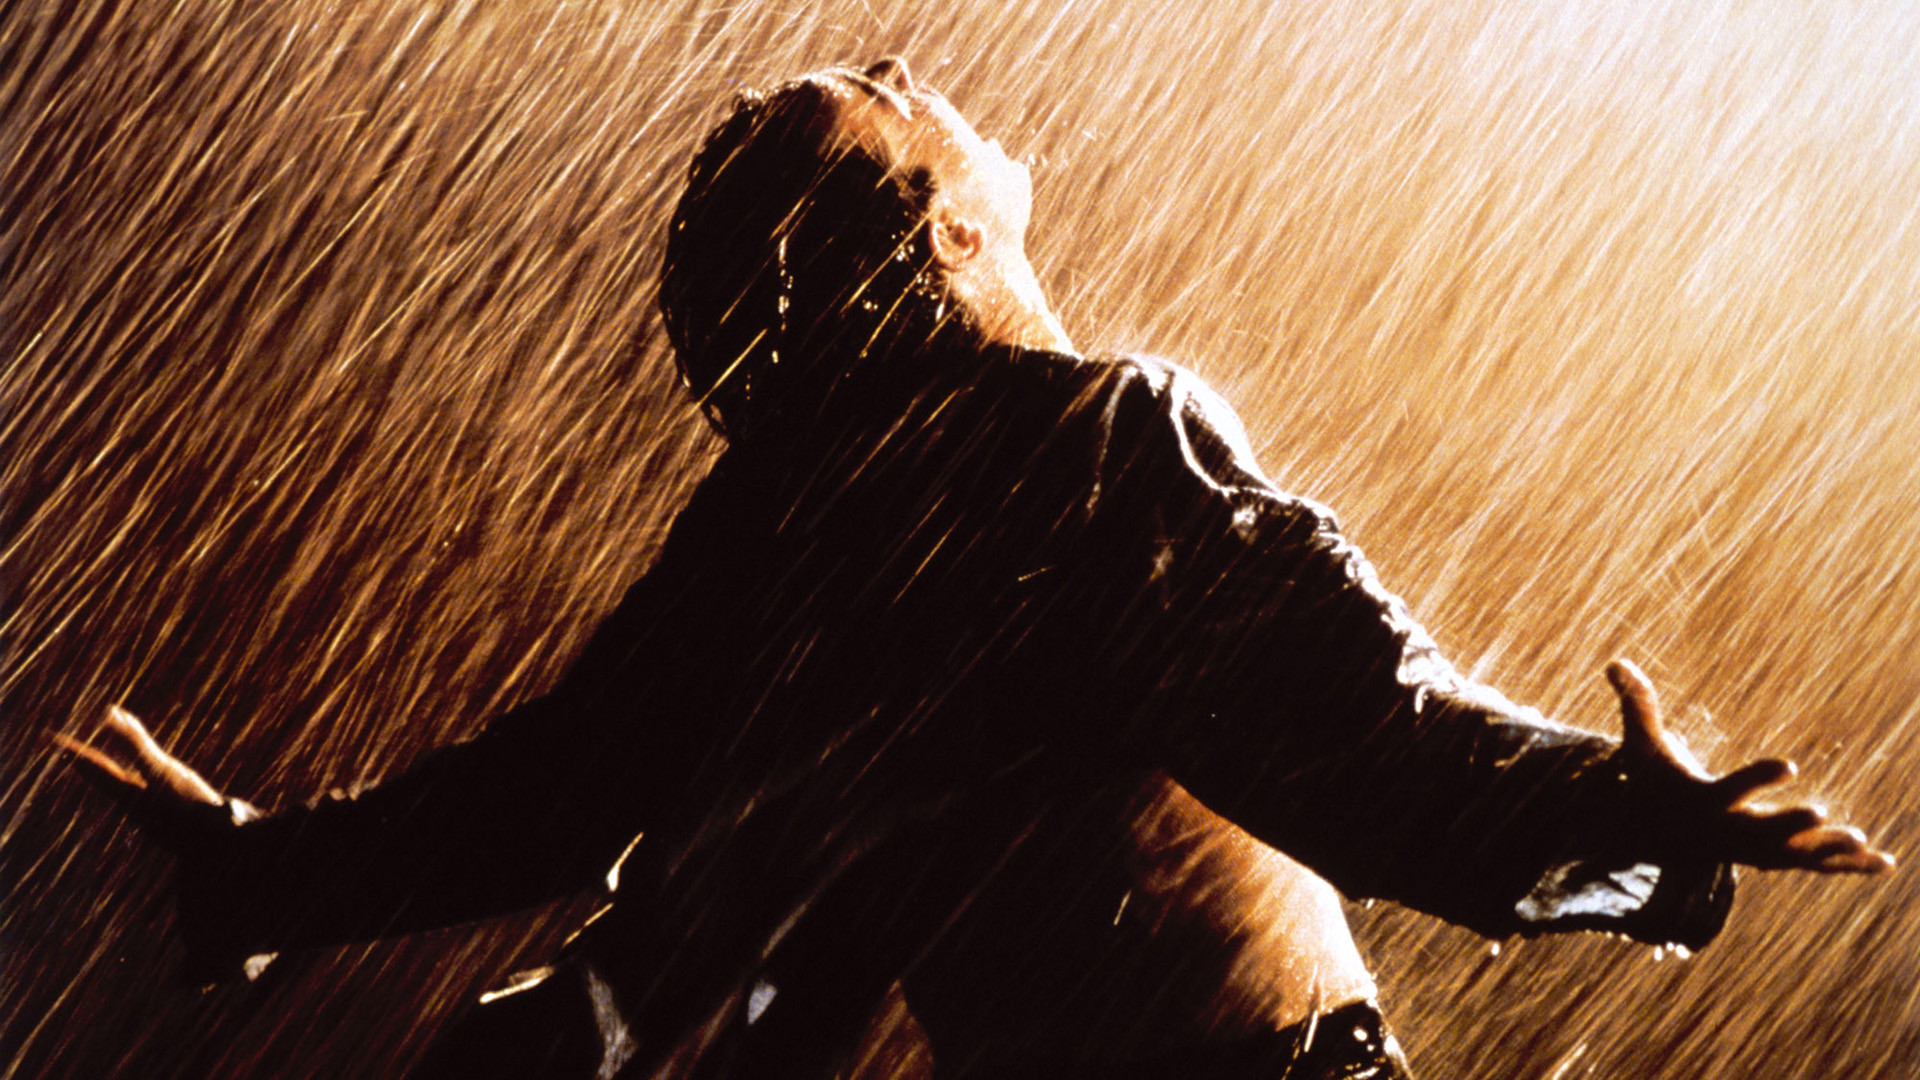 HD The Shawshank Redemption Wallpaper And Photos Movies